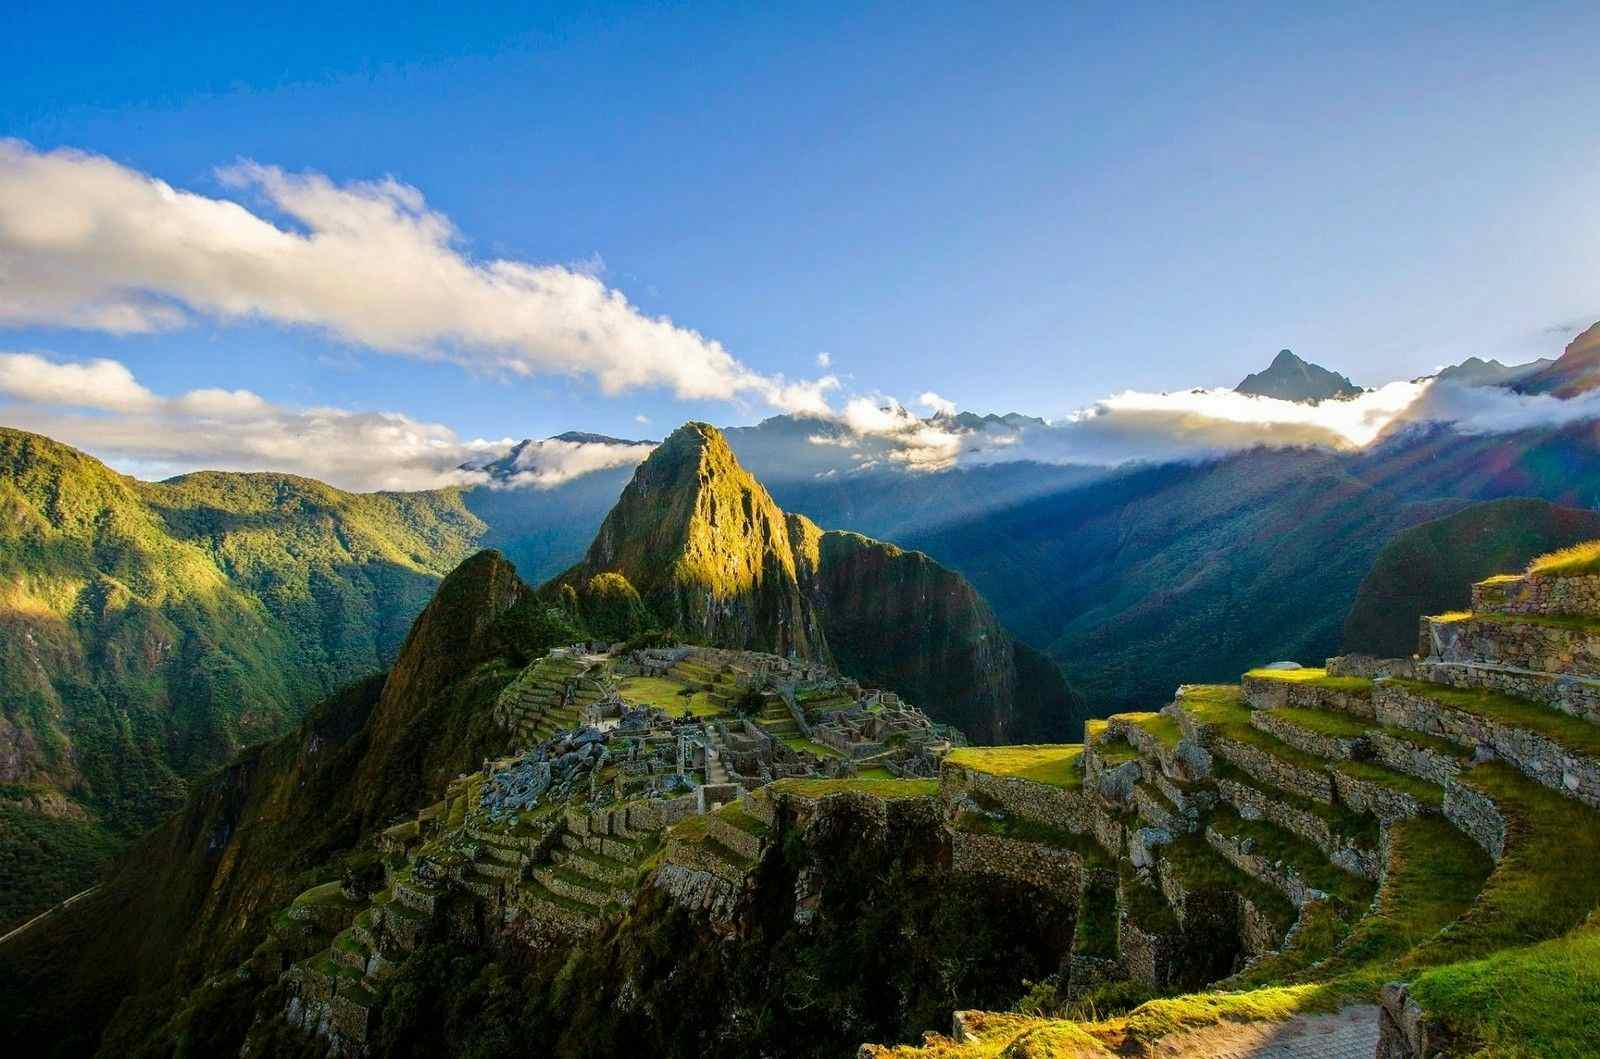 10 Machu Picchu Facts You Probably Don't Know